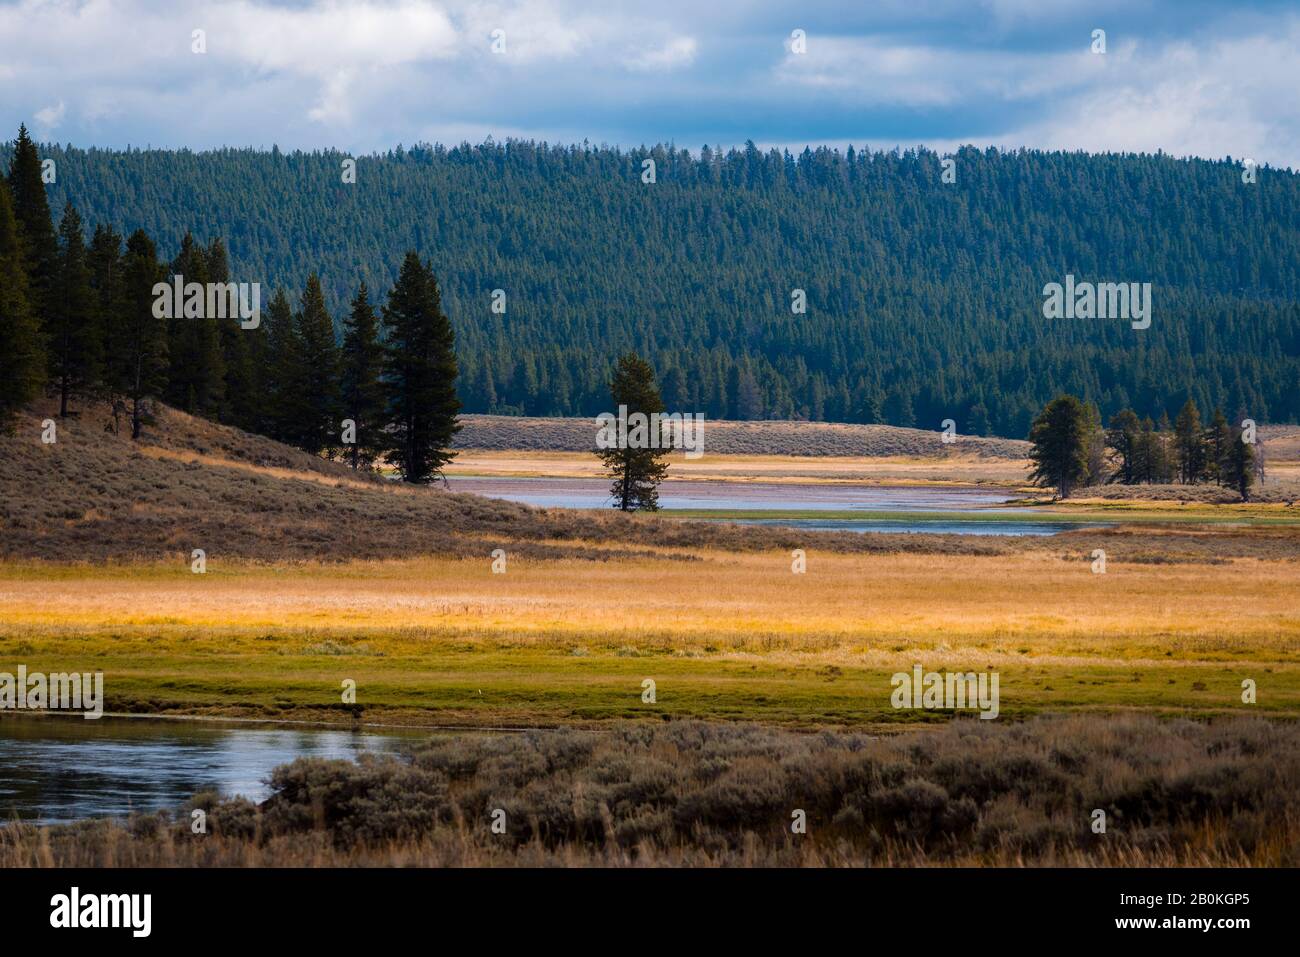 Small pond and lake in golden grassy valley with green forested mountains under a sky with white fluffy clouds. Stock Photo